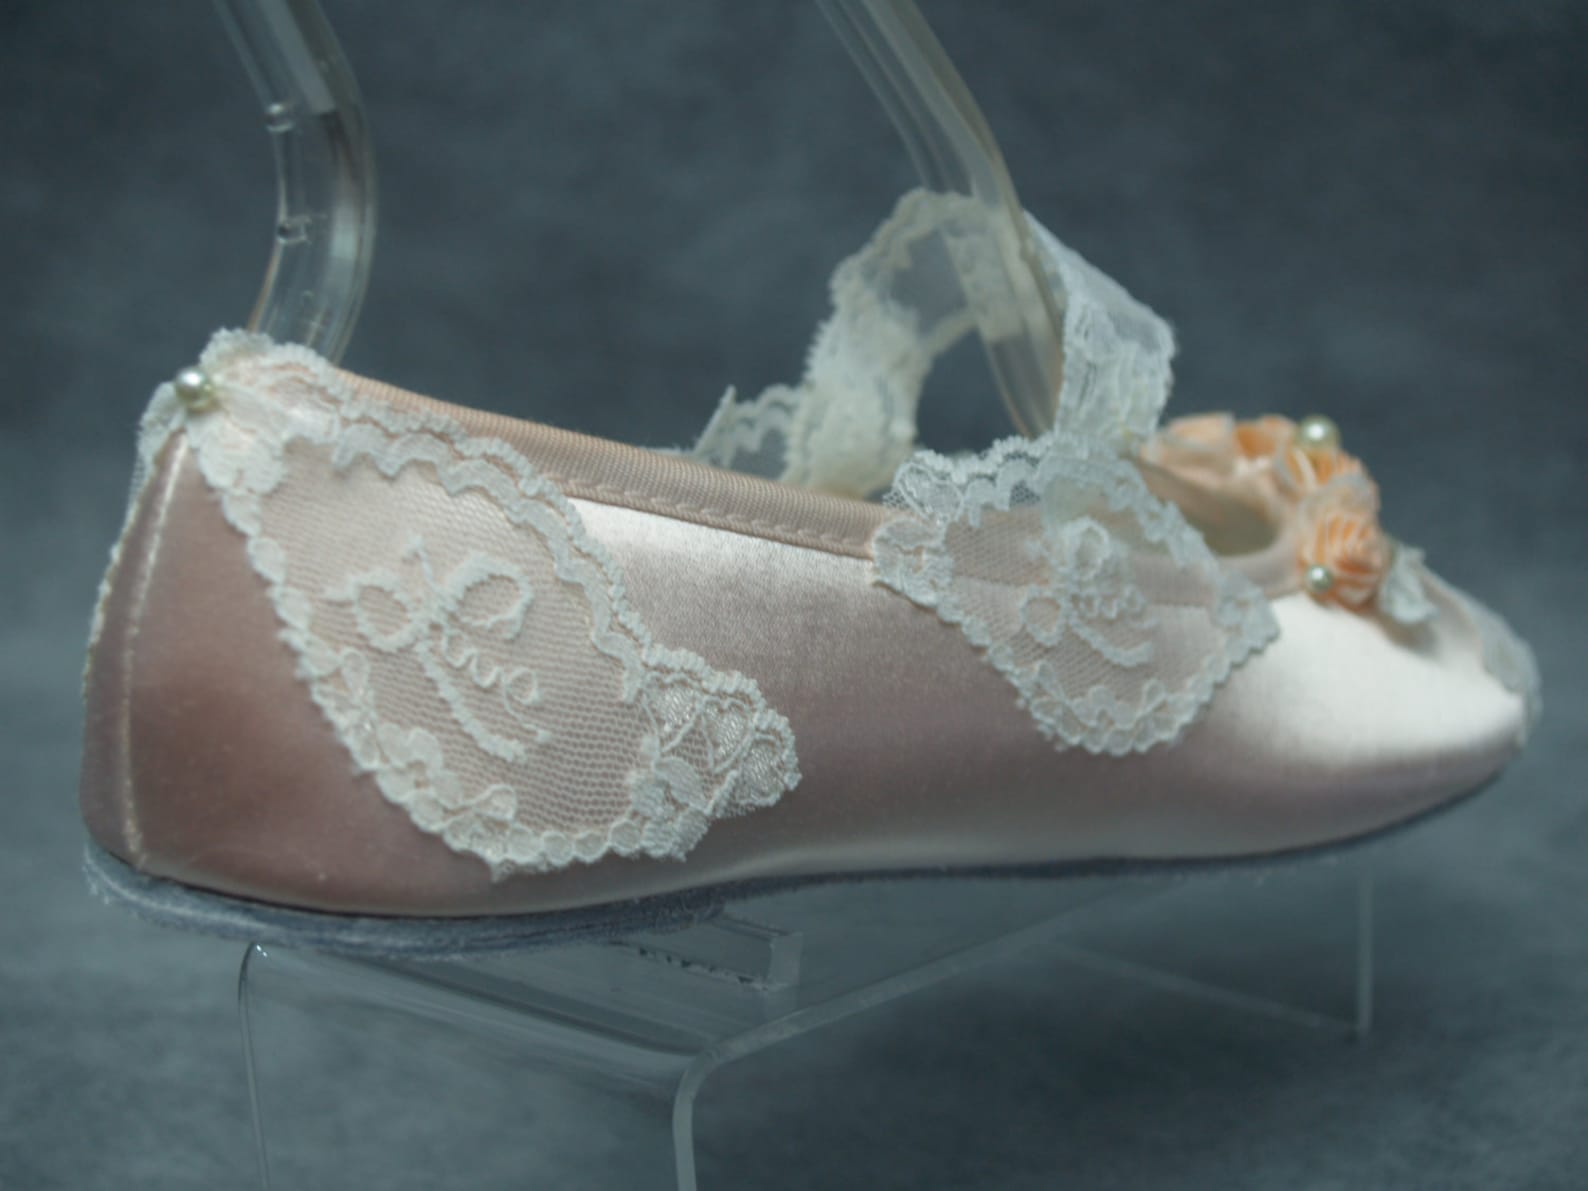 peach flats 6 1/2 victorian flats peach wedding shoes,ballet style slipper,love lace with peach flowers,mary jane style, flat,re